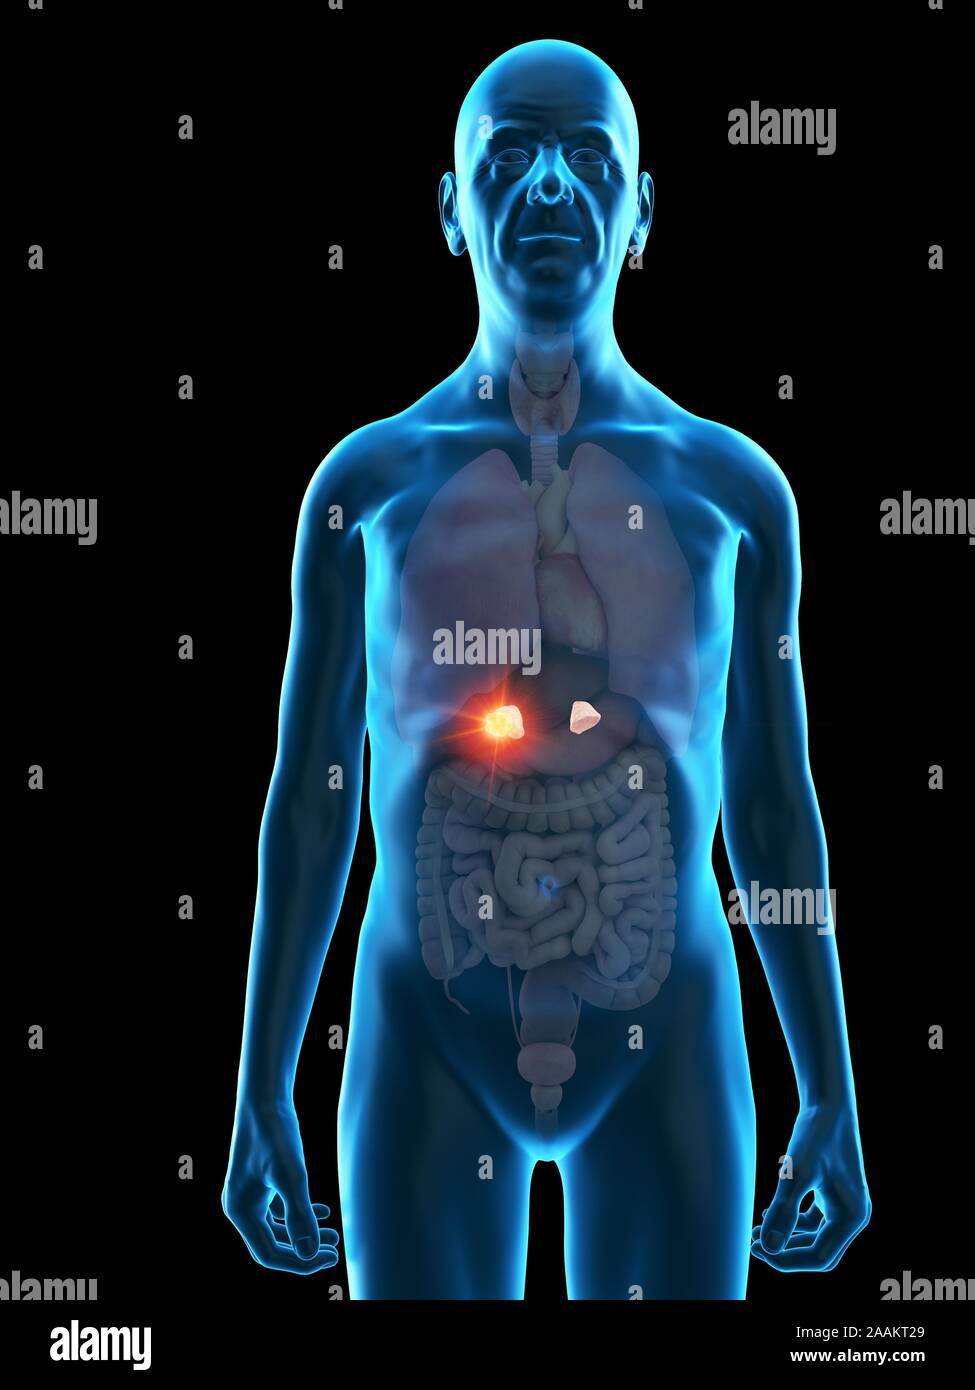 Illustration of an old man's adrenal gland tumour Stock Photo - Alamy